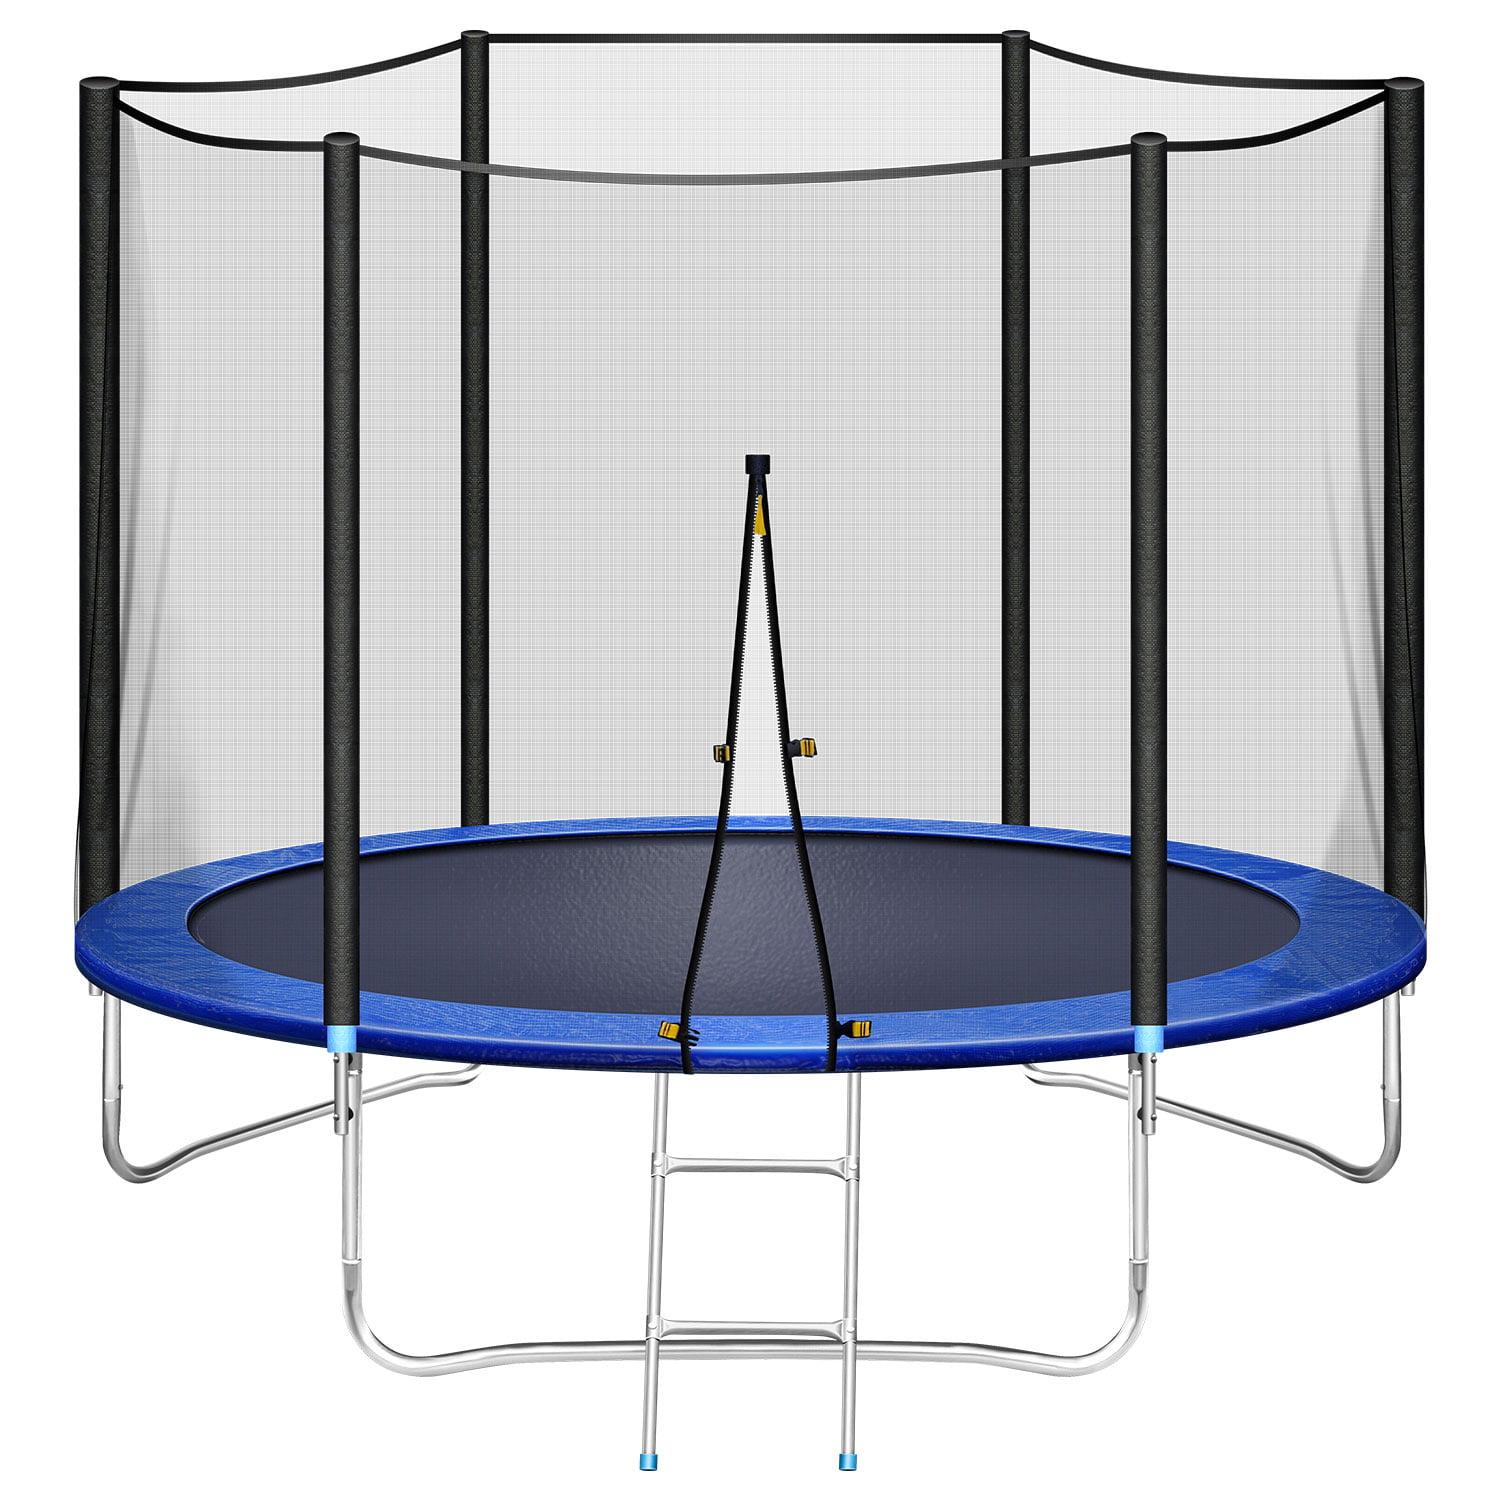 JOSTYLE Outdoor Trampoline 10FT Jump Recreational Trampolines Safety Enclosure Net Combo Bounce Jump for Kids Backyard with Spring Pad Waterproof Jump Mat Ladder All Accessories 